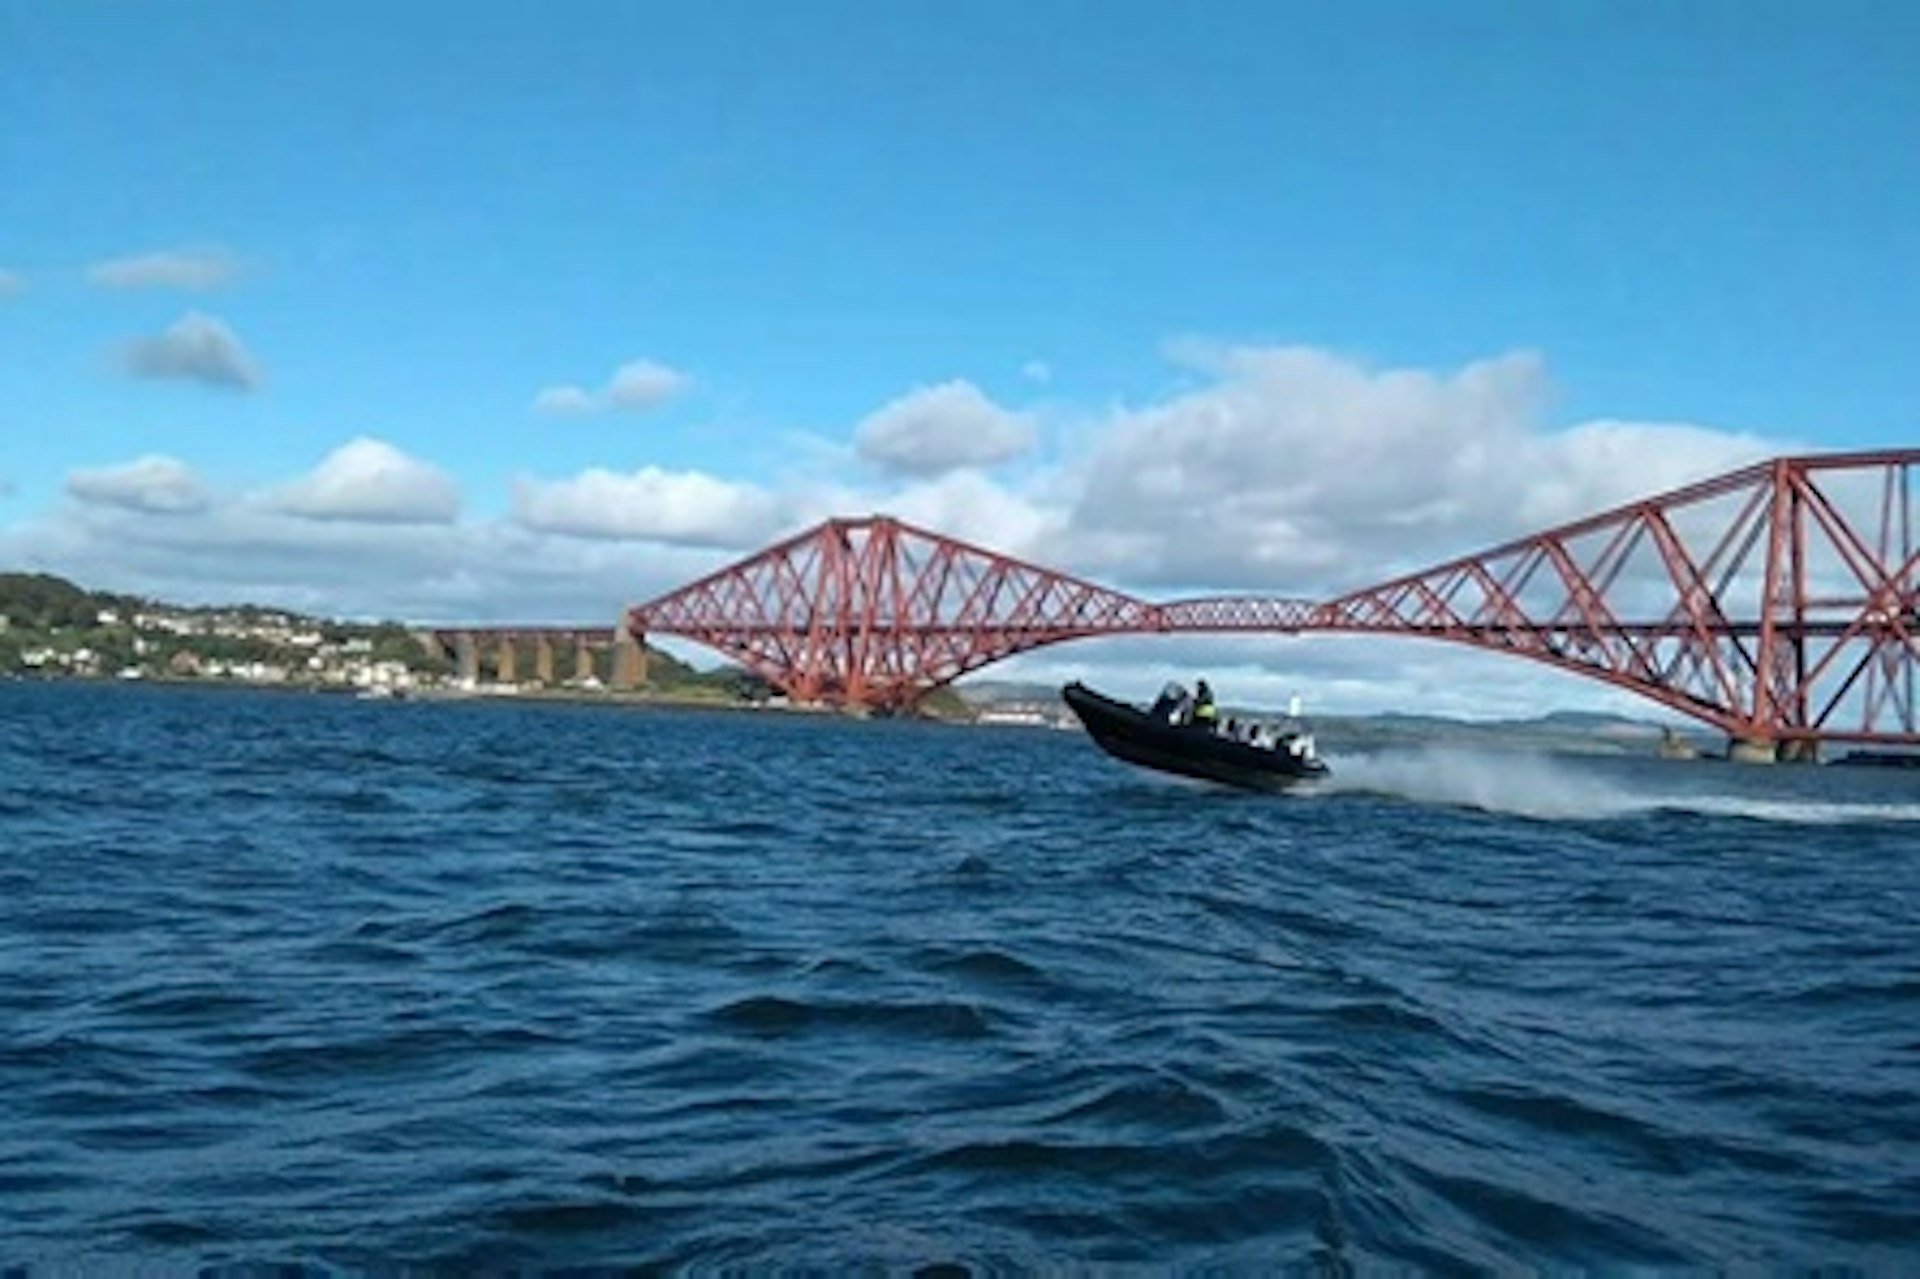 Full Day Learn to Drive a RIB Powerboat on the Forth 1